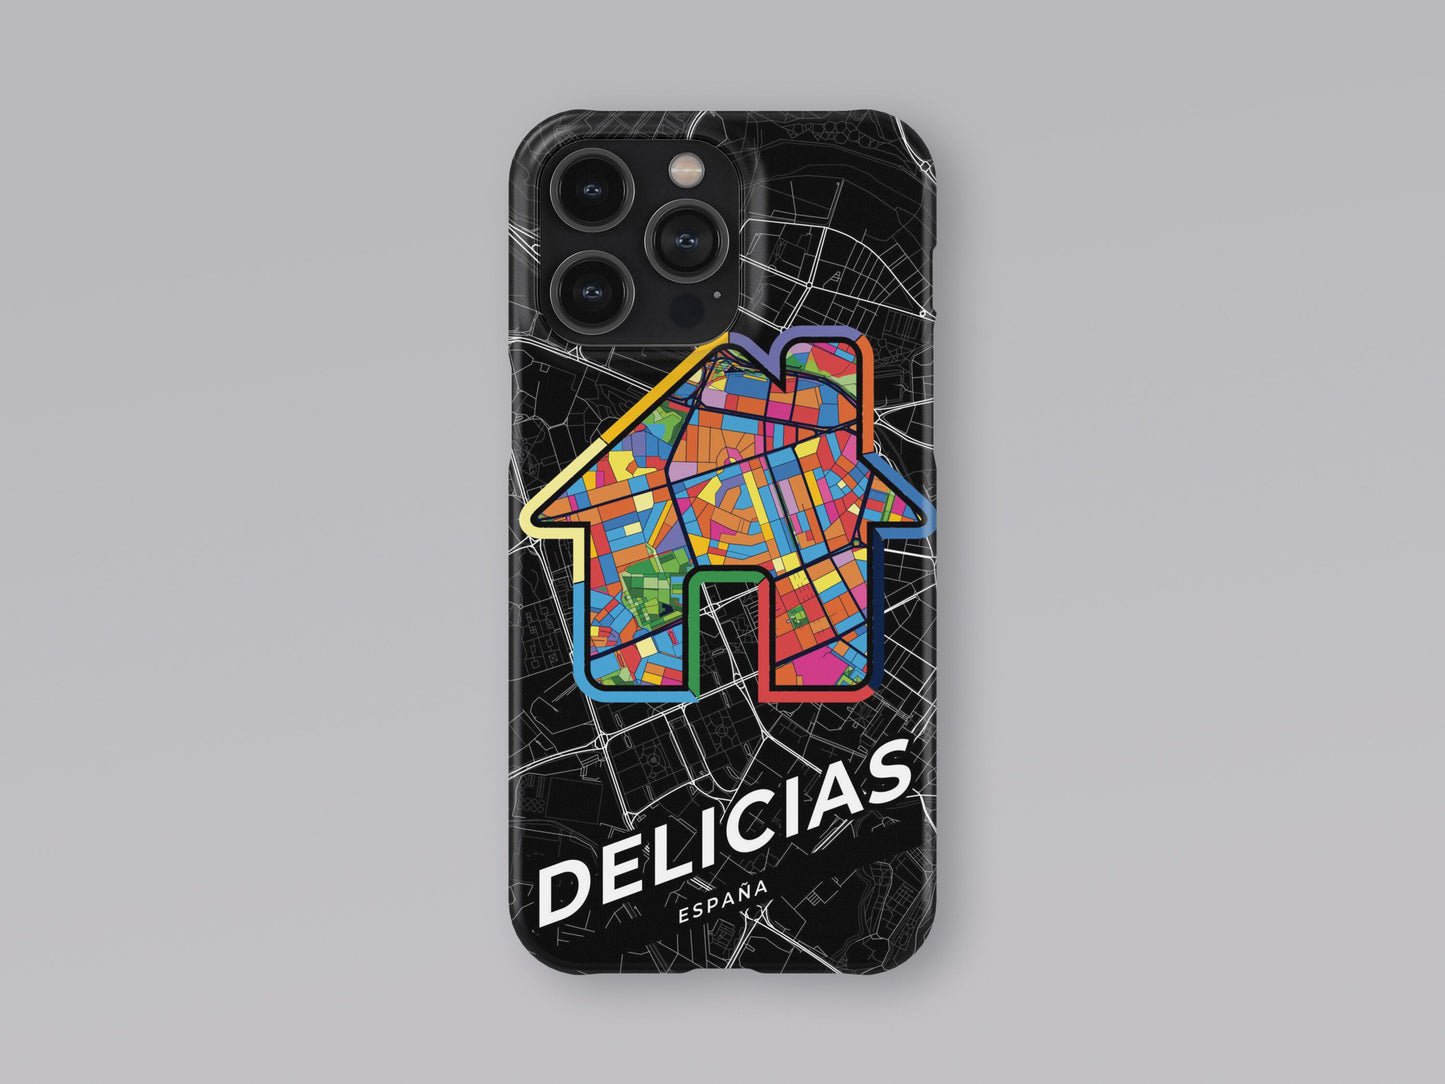 Delicias Spain slim phone case with colorful icon. Birthday, wedding or housewarming gift. Couple match cases. 3